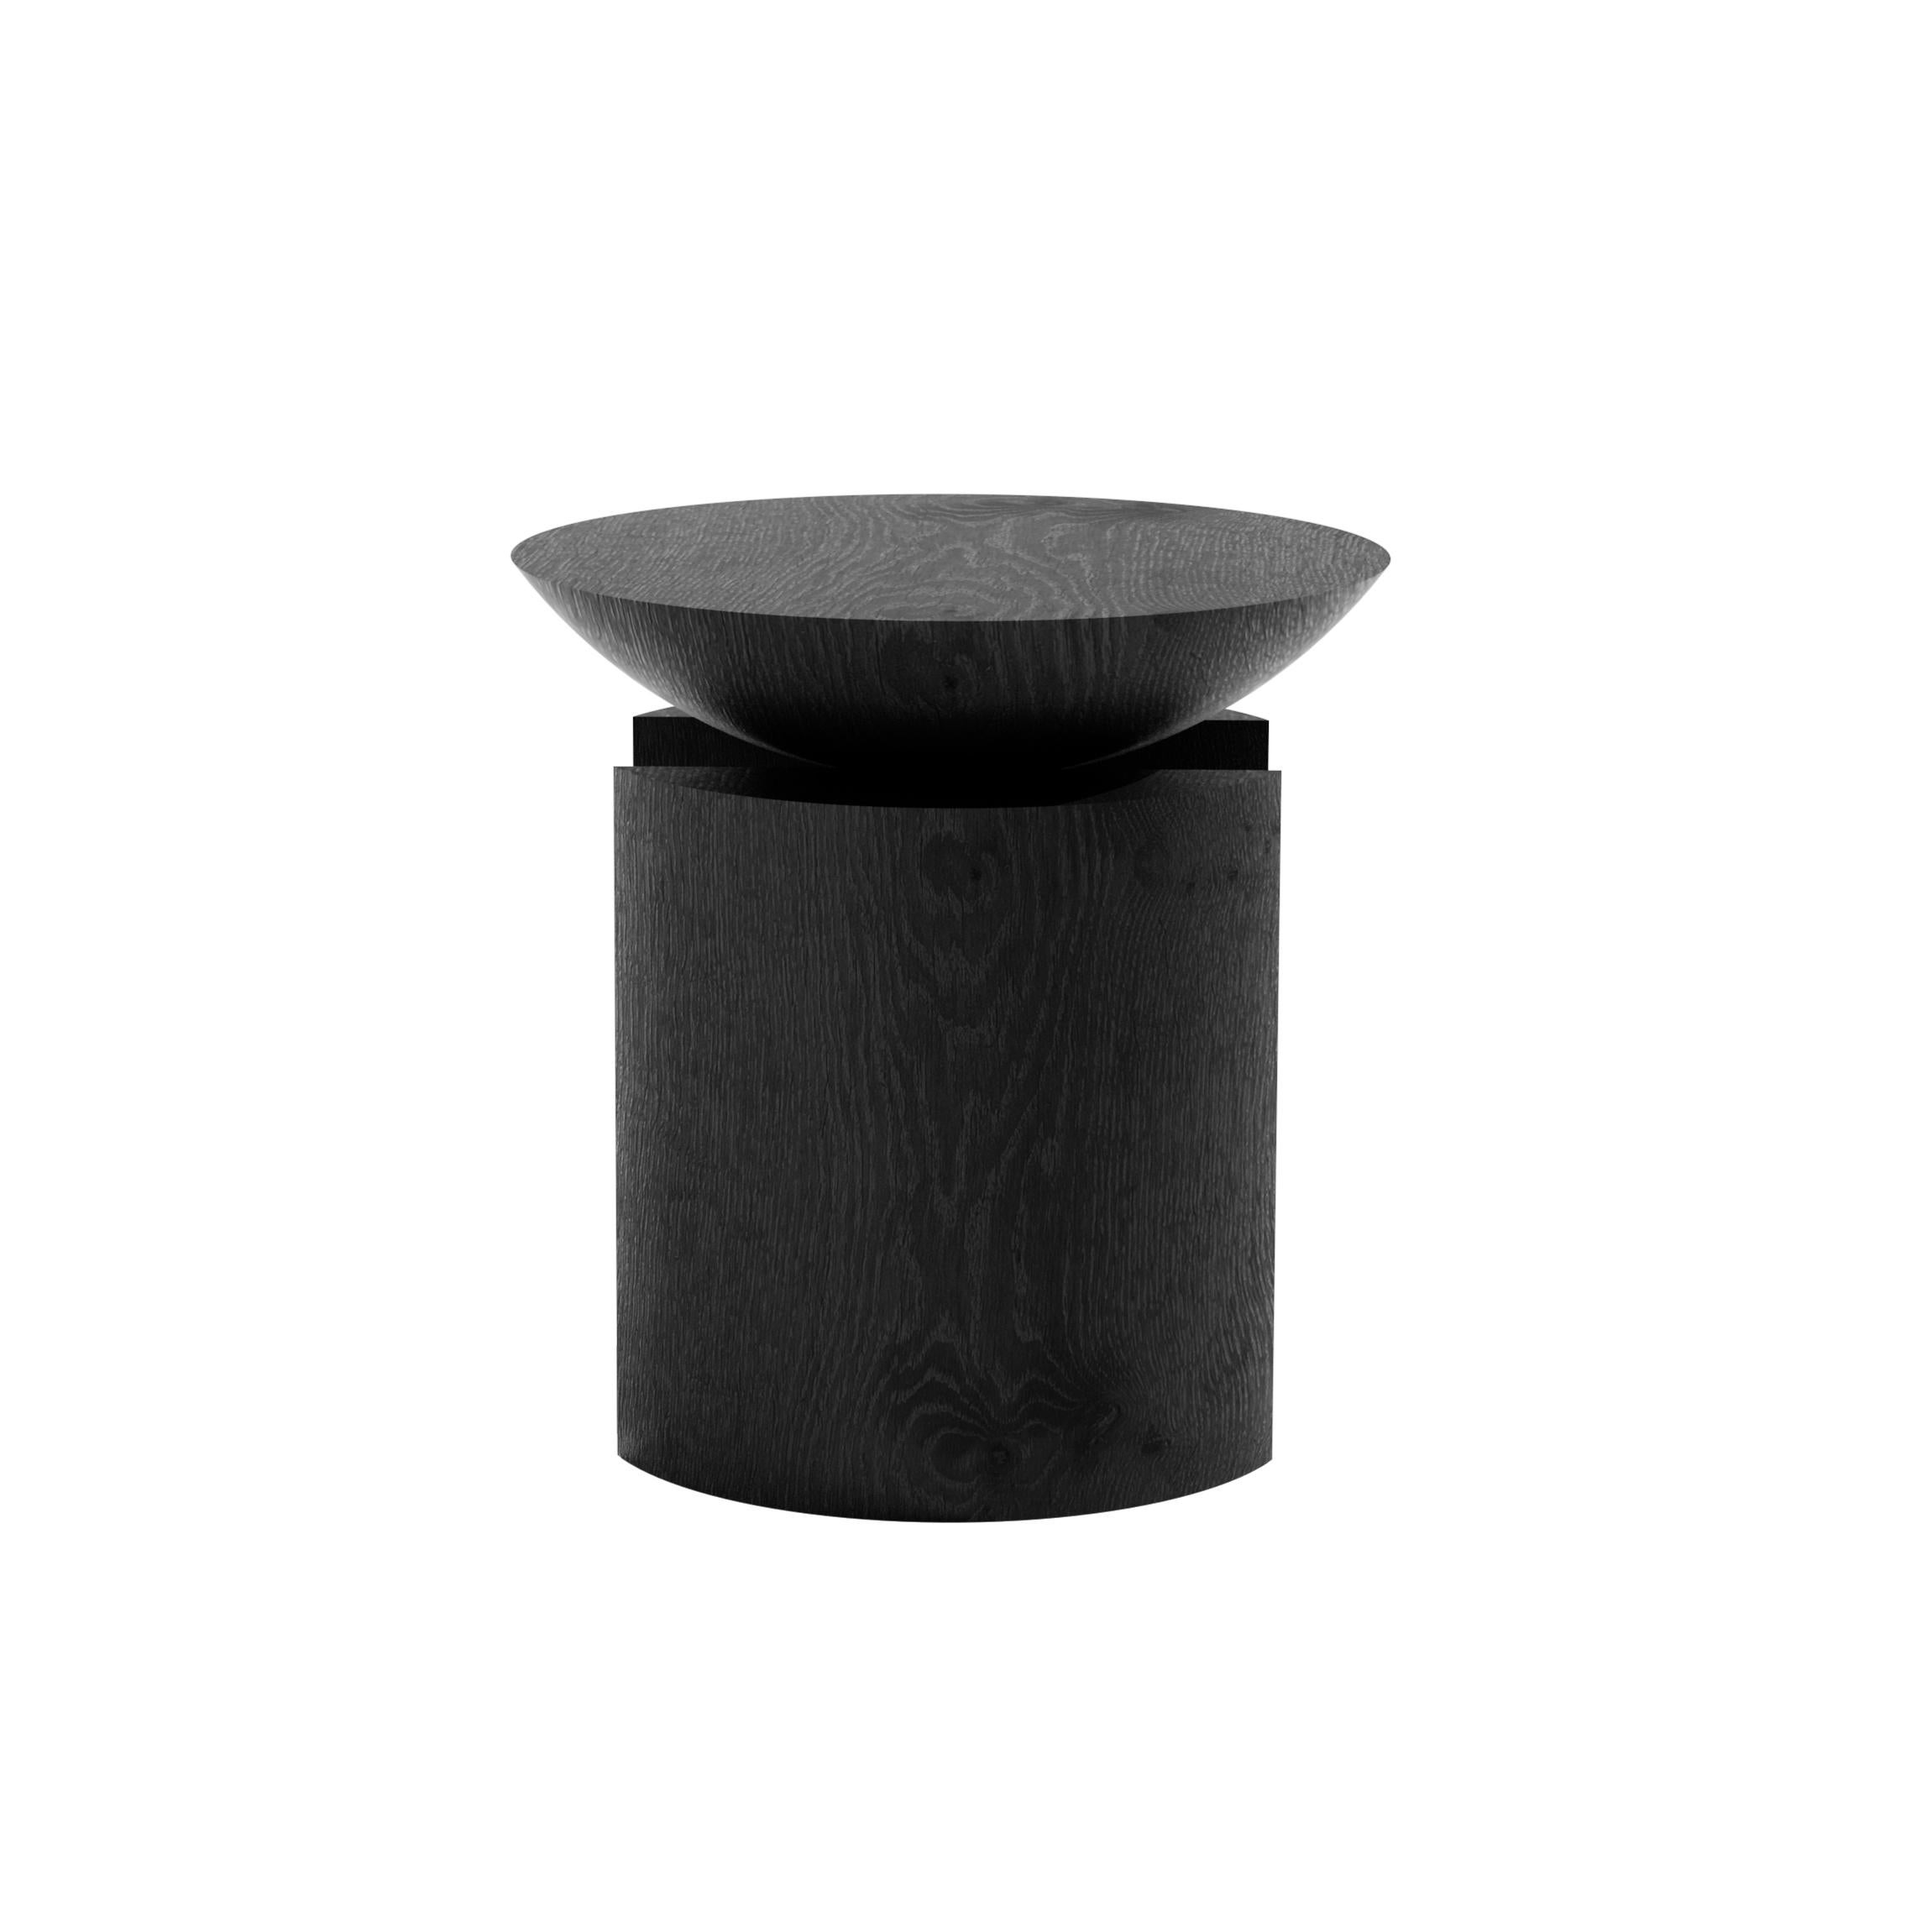 Minimalist Anca Sculptural Side Table ( H 16in.) Tropical Hardwood  by Pedro Paulo Venzon